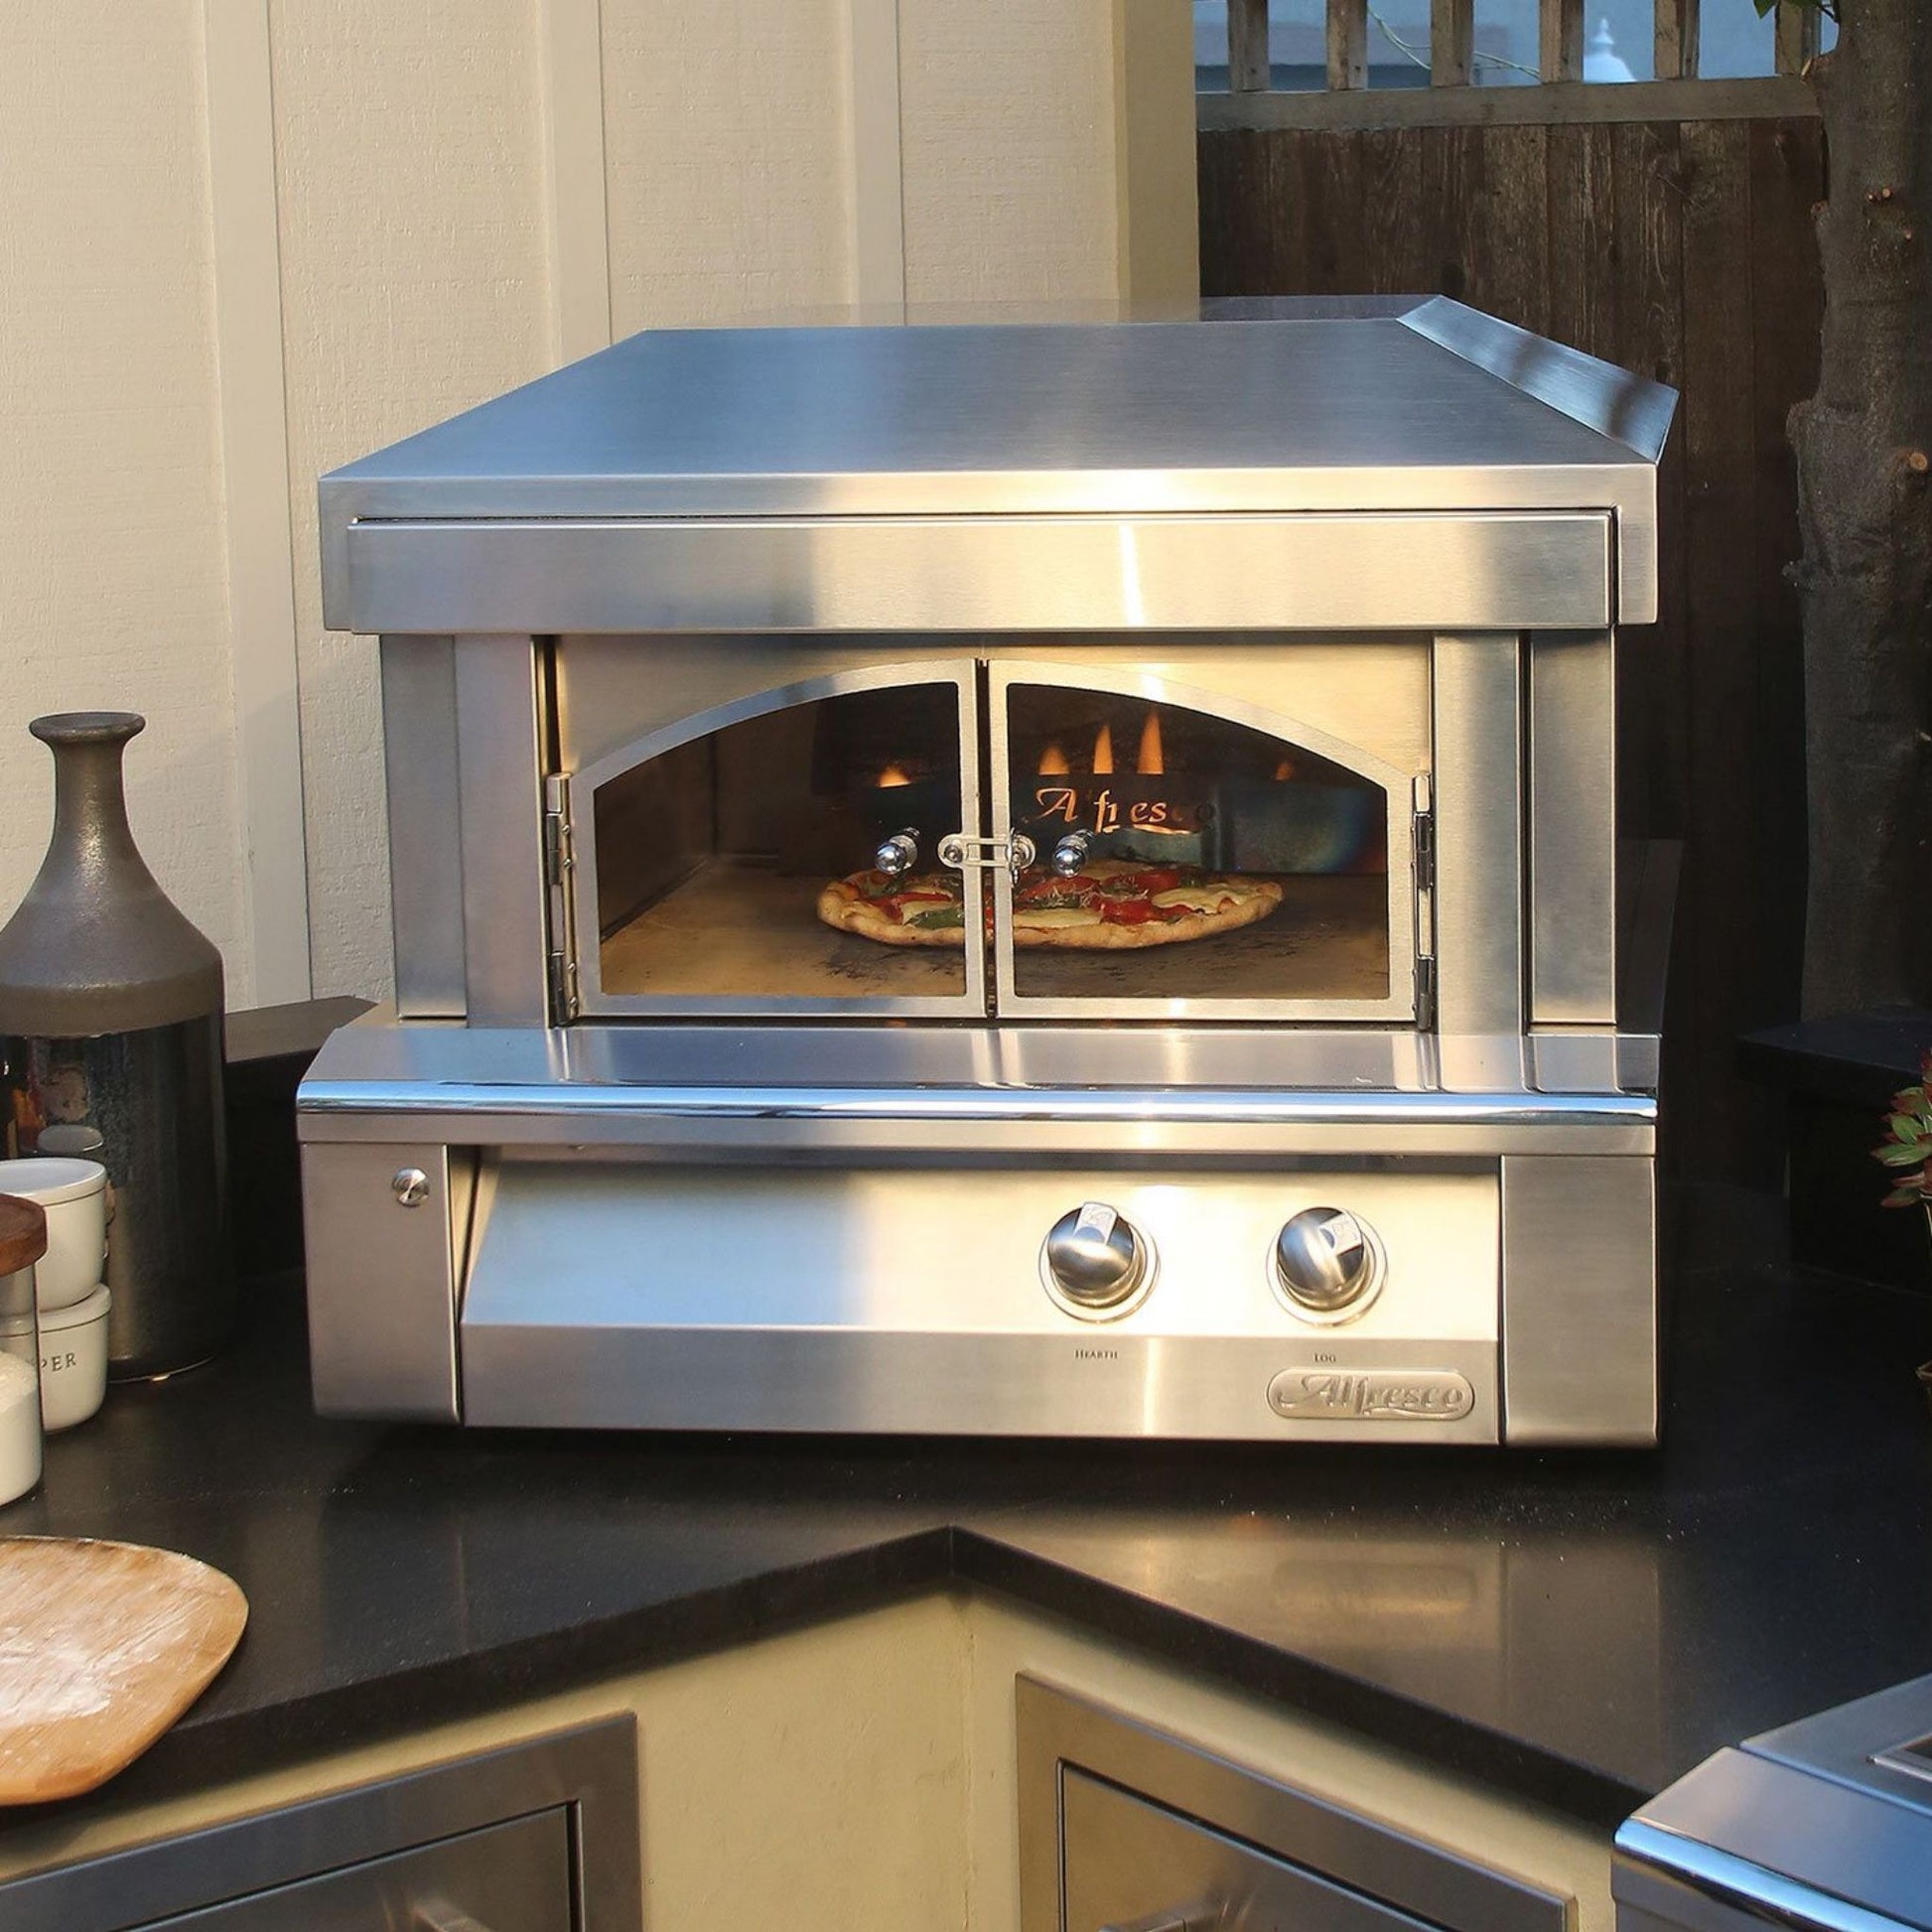 Alfresco 30" Ultramarine Blue Gloss Natural Gas Pizza Oven for Countertop Mounting